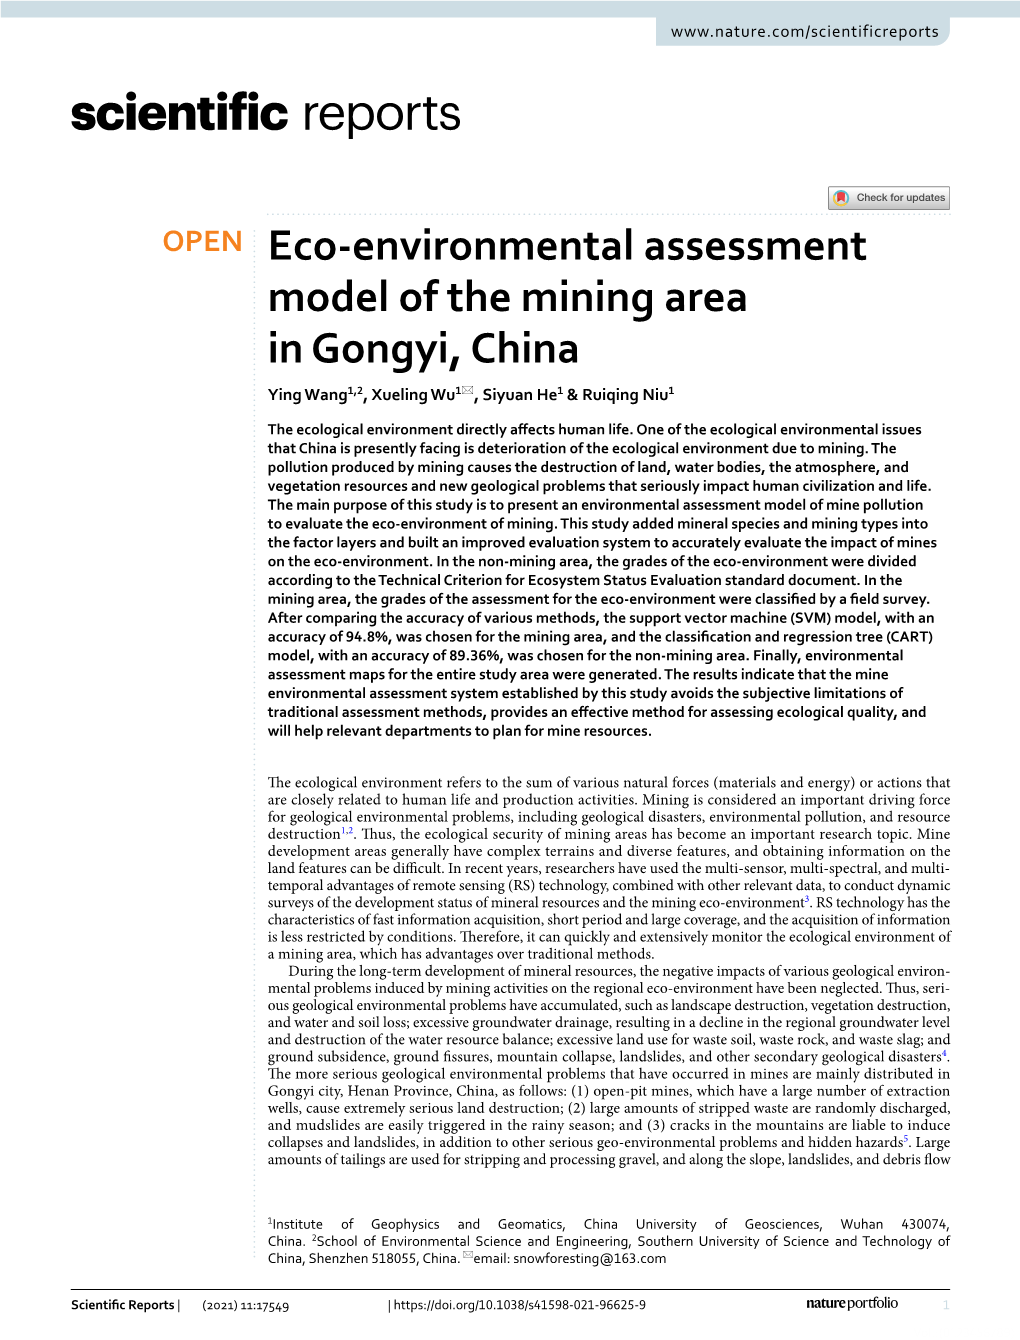 Eco-Environmental Assessment Model of the Mining Area in Gongyi, China